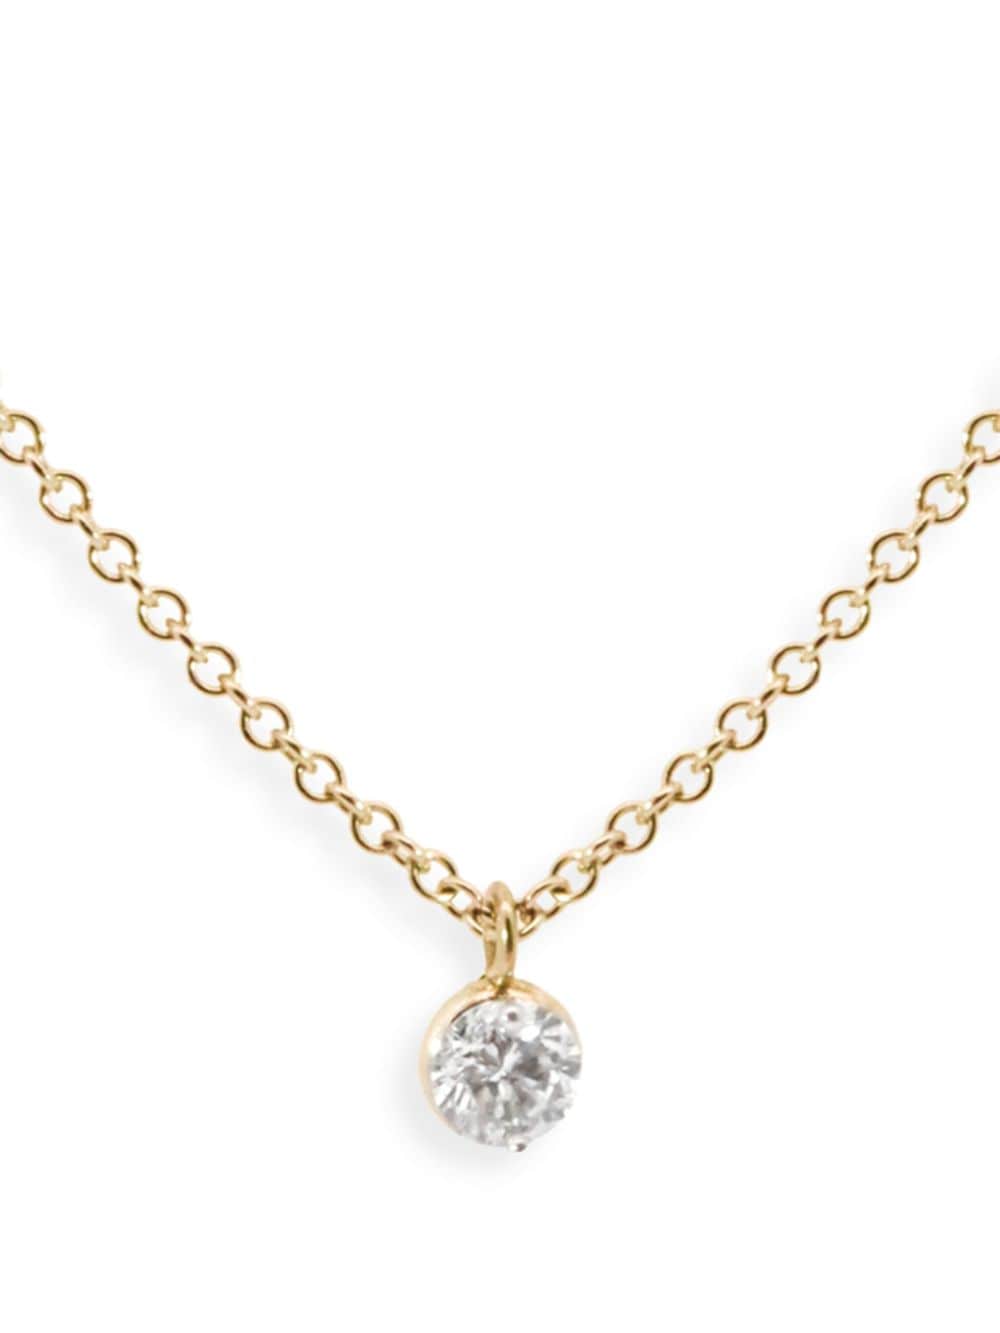 Shop The Alkemistry 18kt Yellow Gold Diamond Chain Necklace